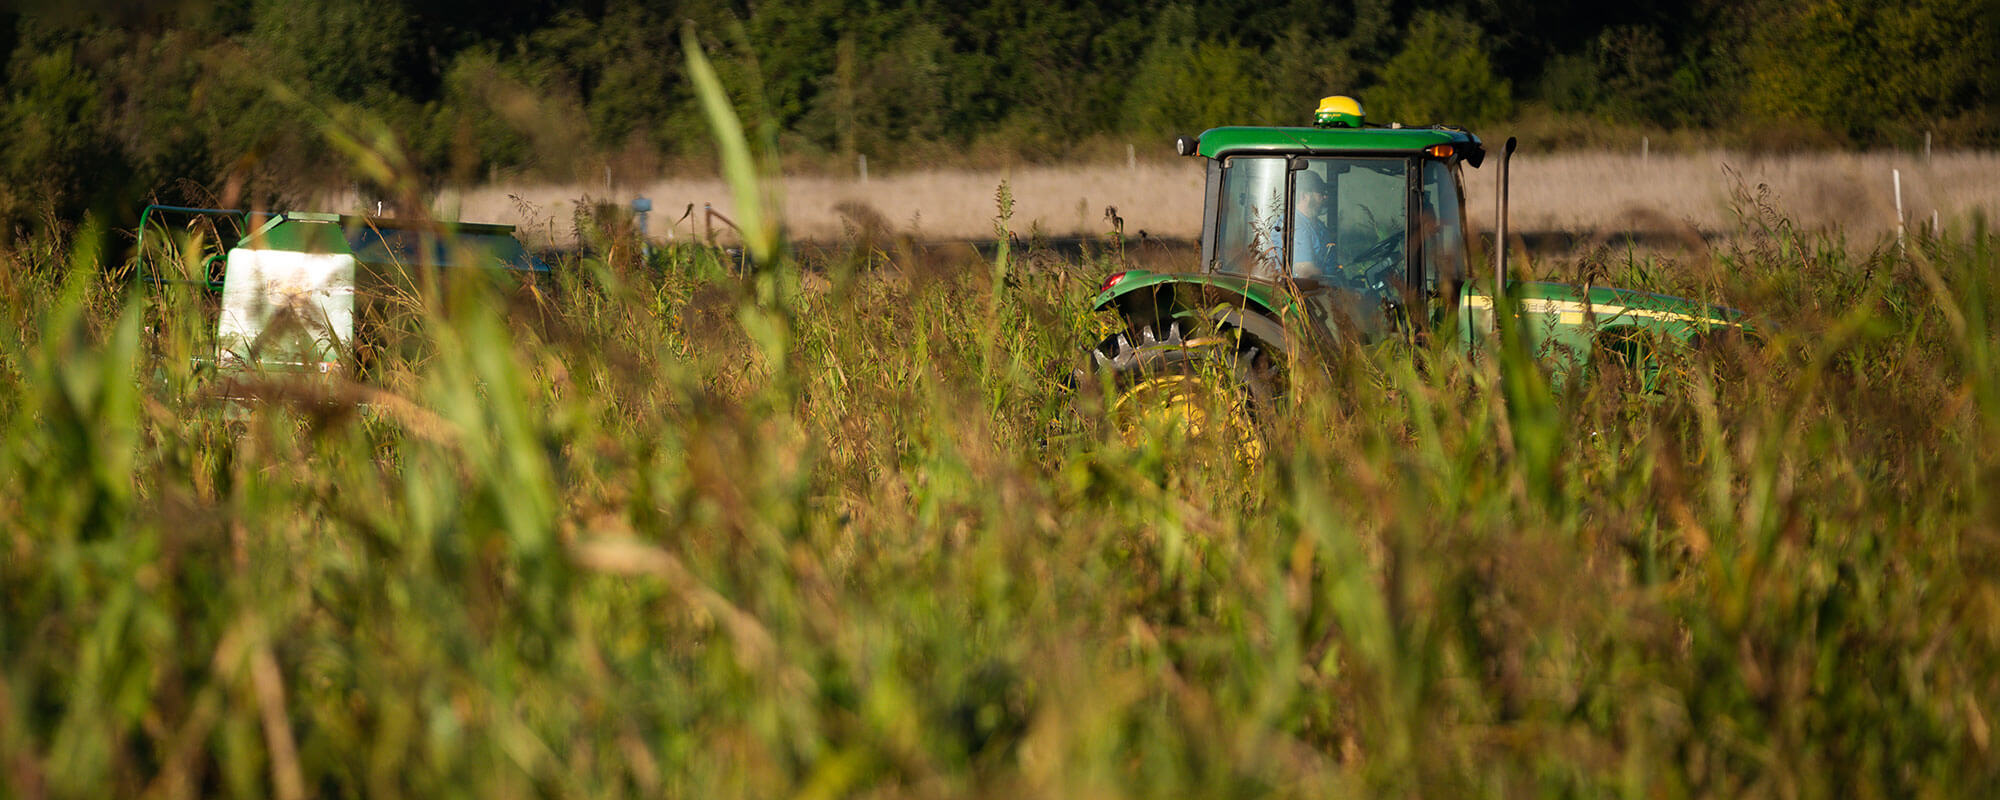 Shawn Norton drives a tractor pulling a no-till drill in a cover crop field.